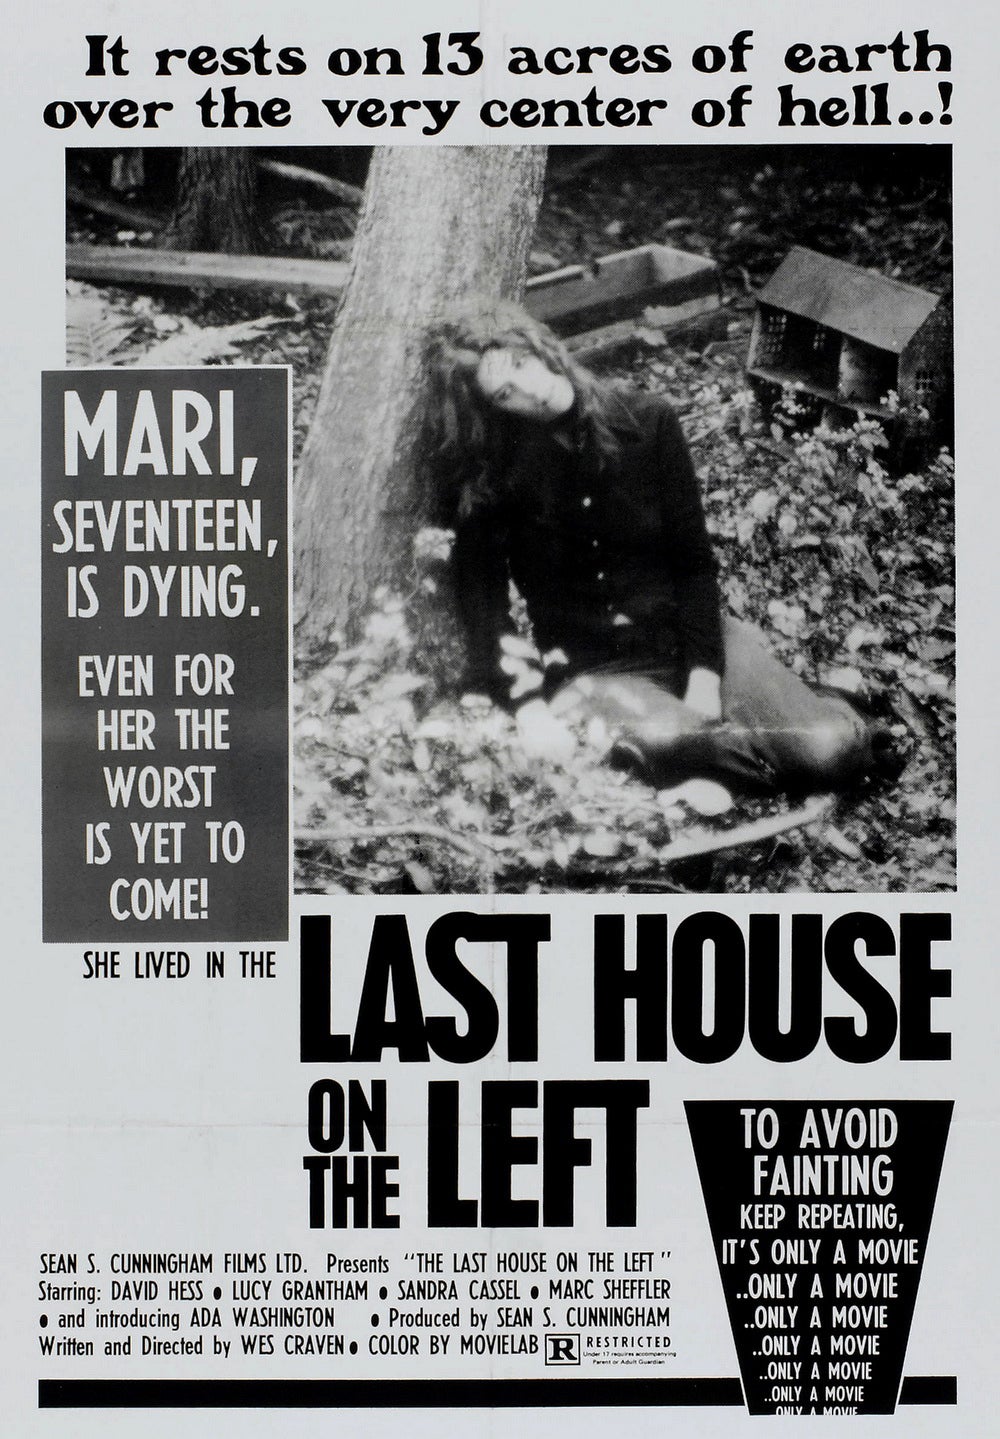 The poster artwork for ‘The Last House on the Left’, complete with fainting warning